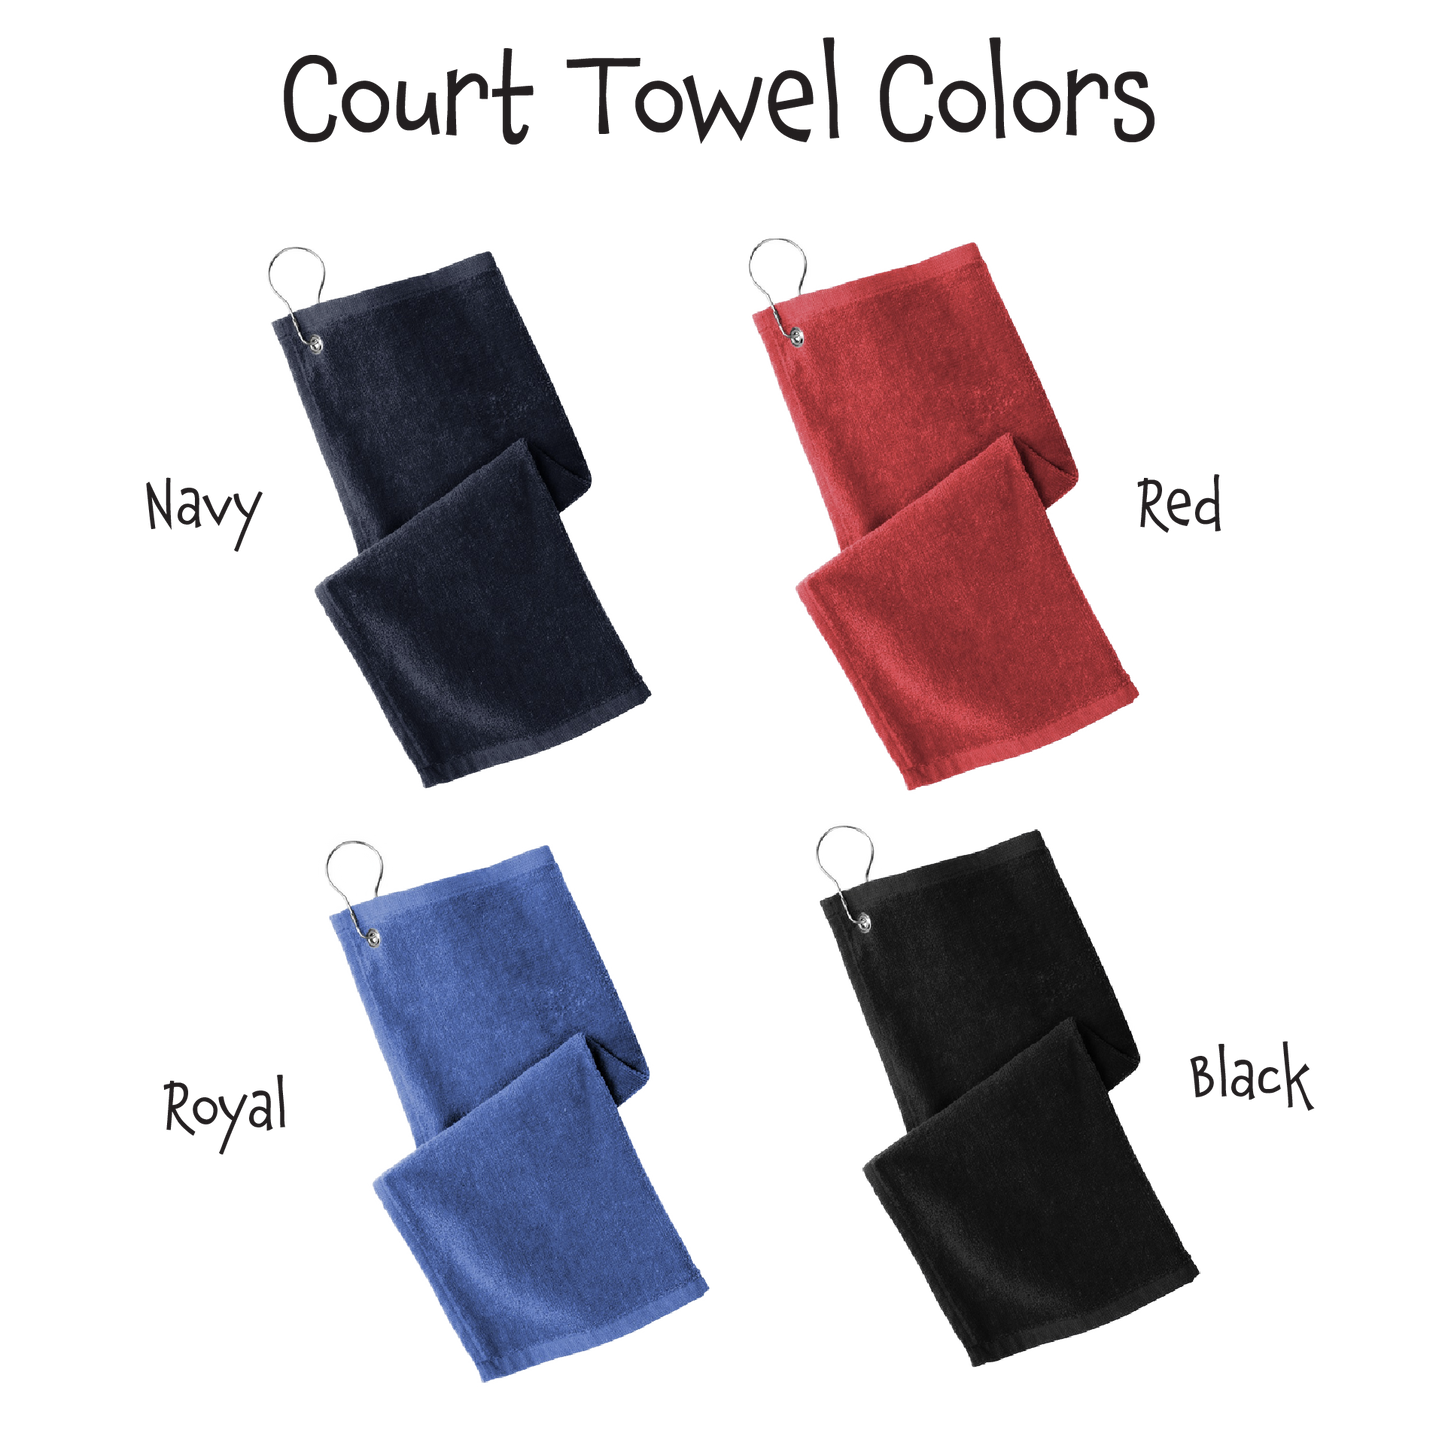 Pickle | Pickleball Court Towels | Grommeted 100% Cotton Terry Velour